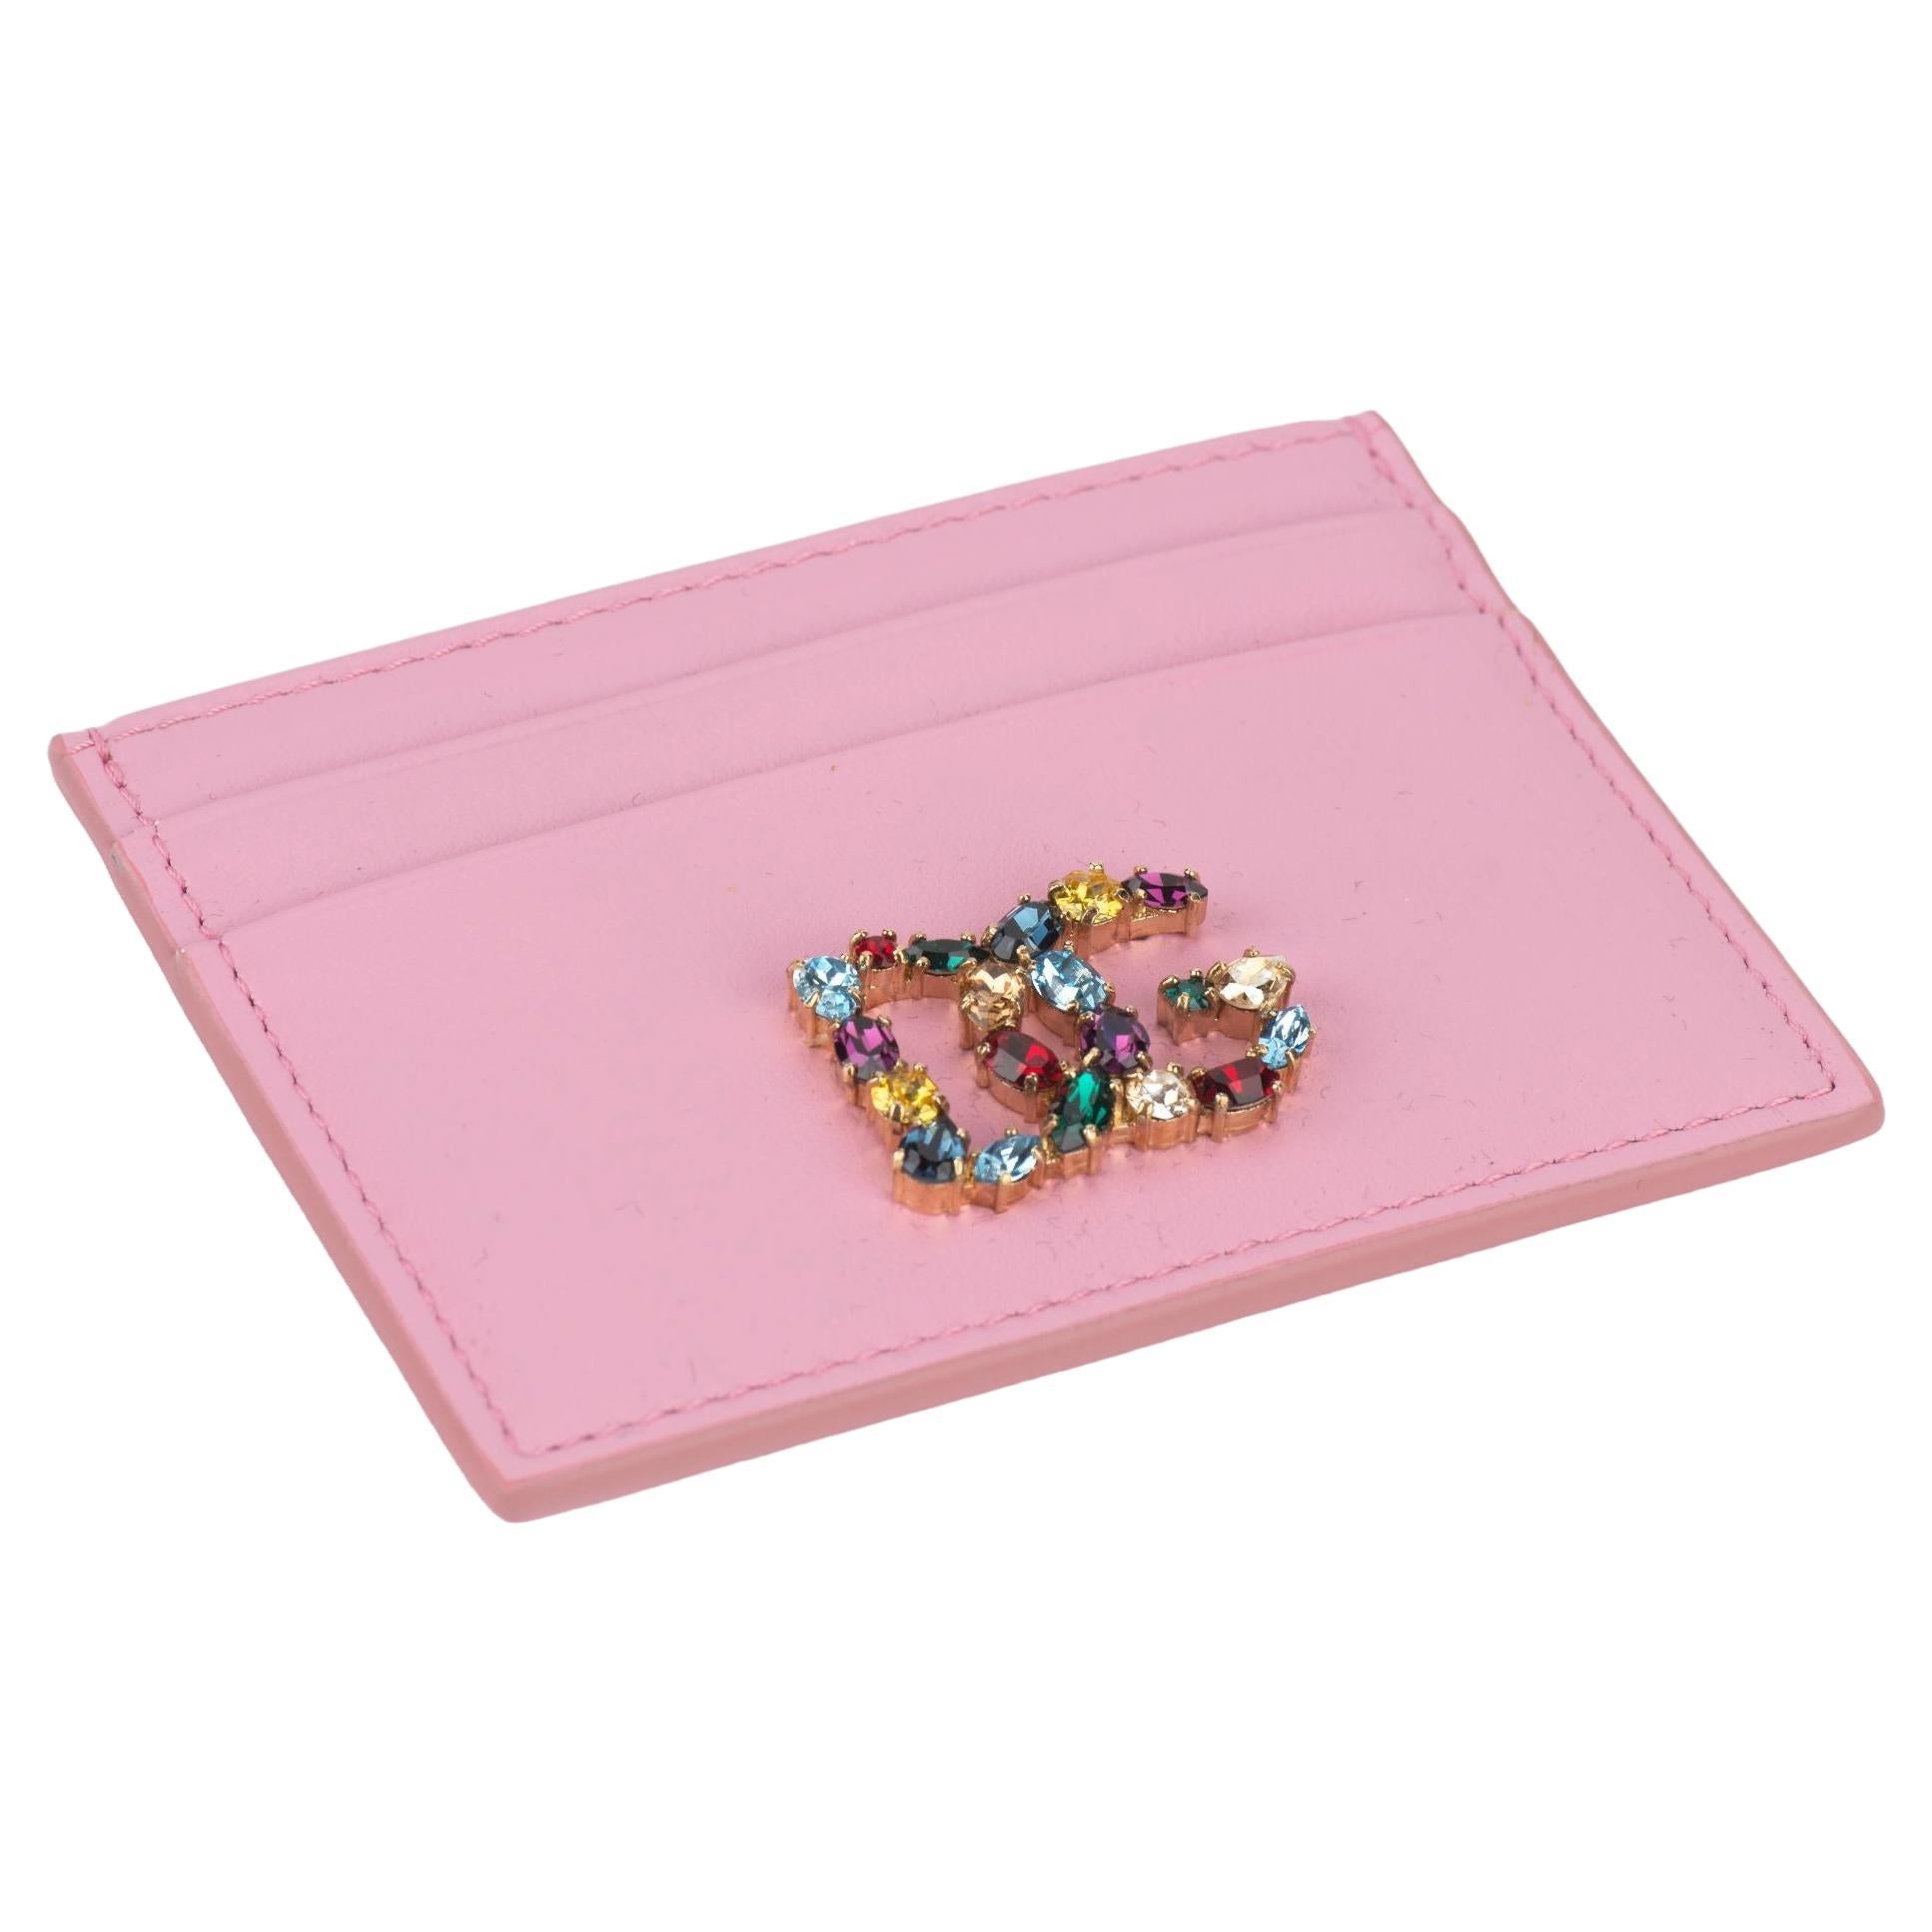 Dolce New Pink Jeweled CC Wallet For Sale